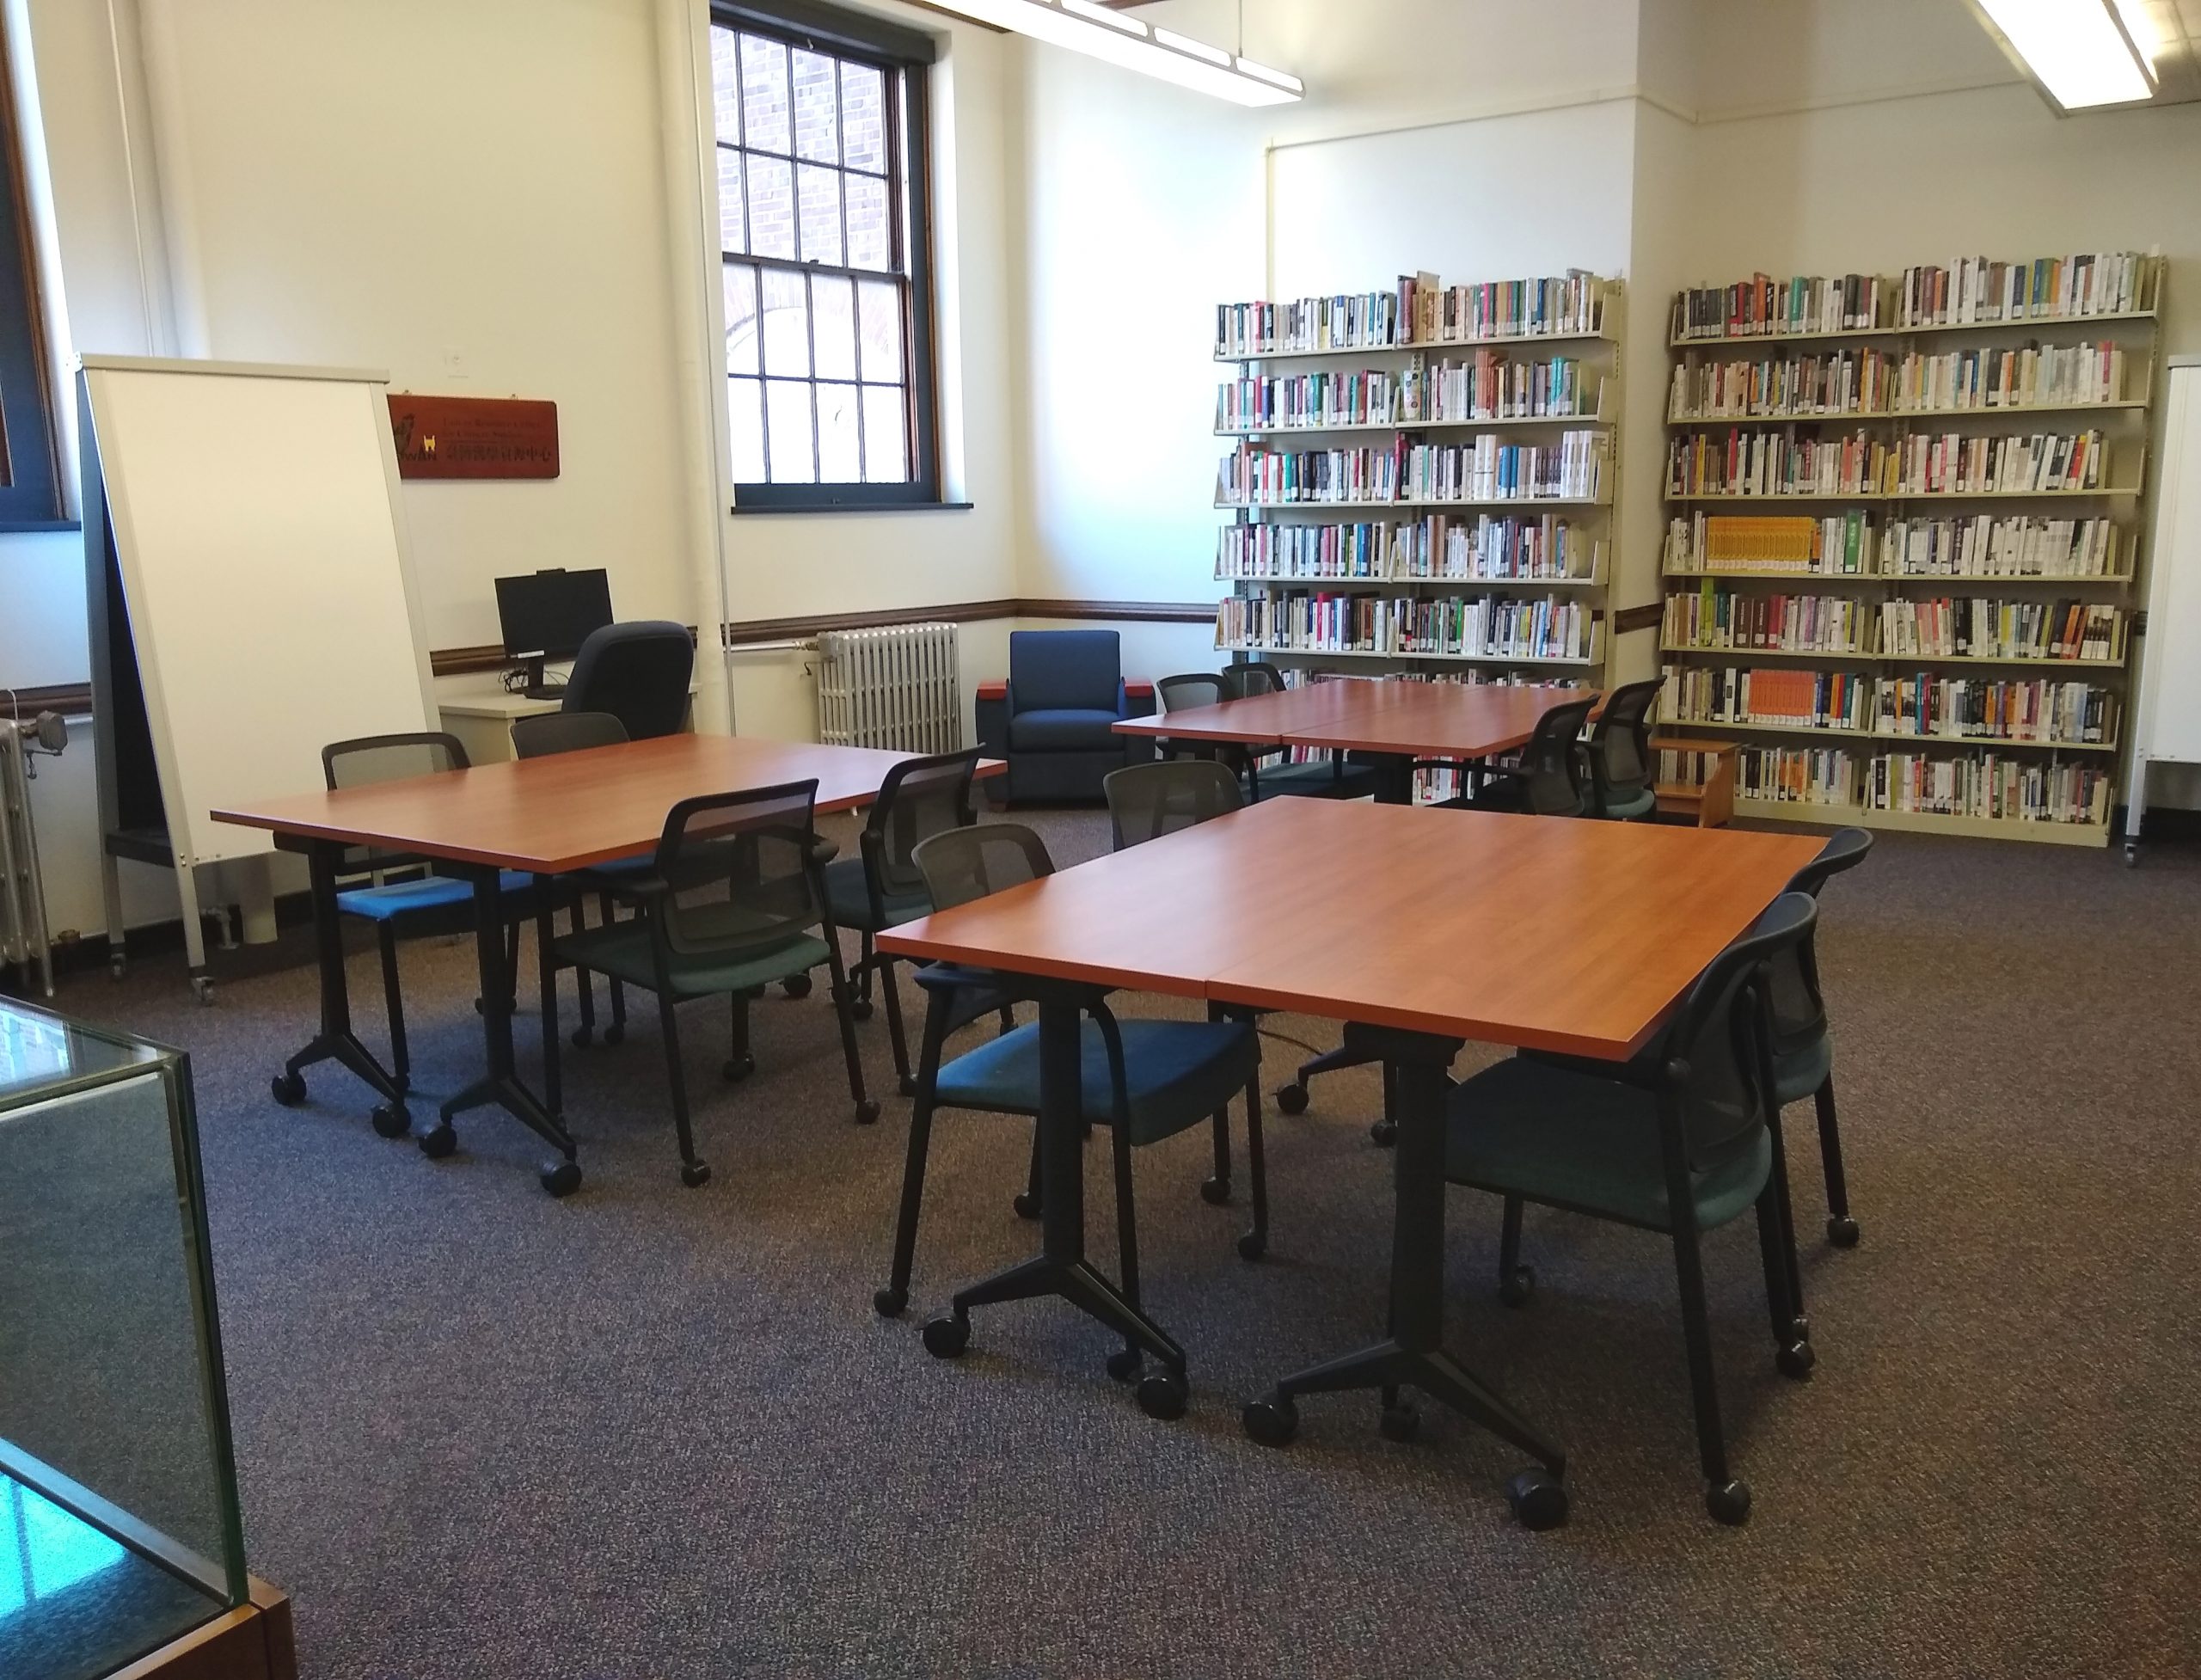 Three tables with chairs in a mid-sized, carpeted room with bookshelves and windows in the back.